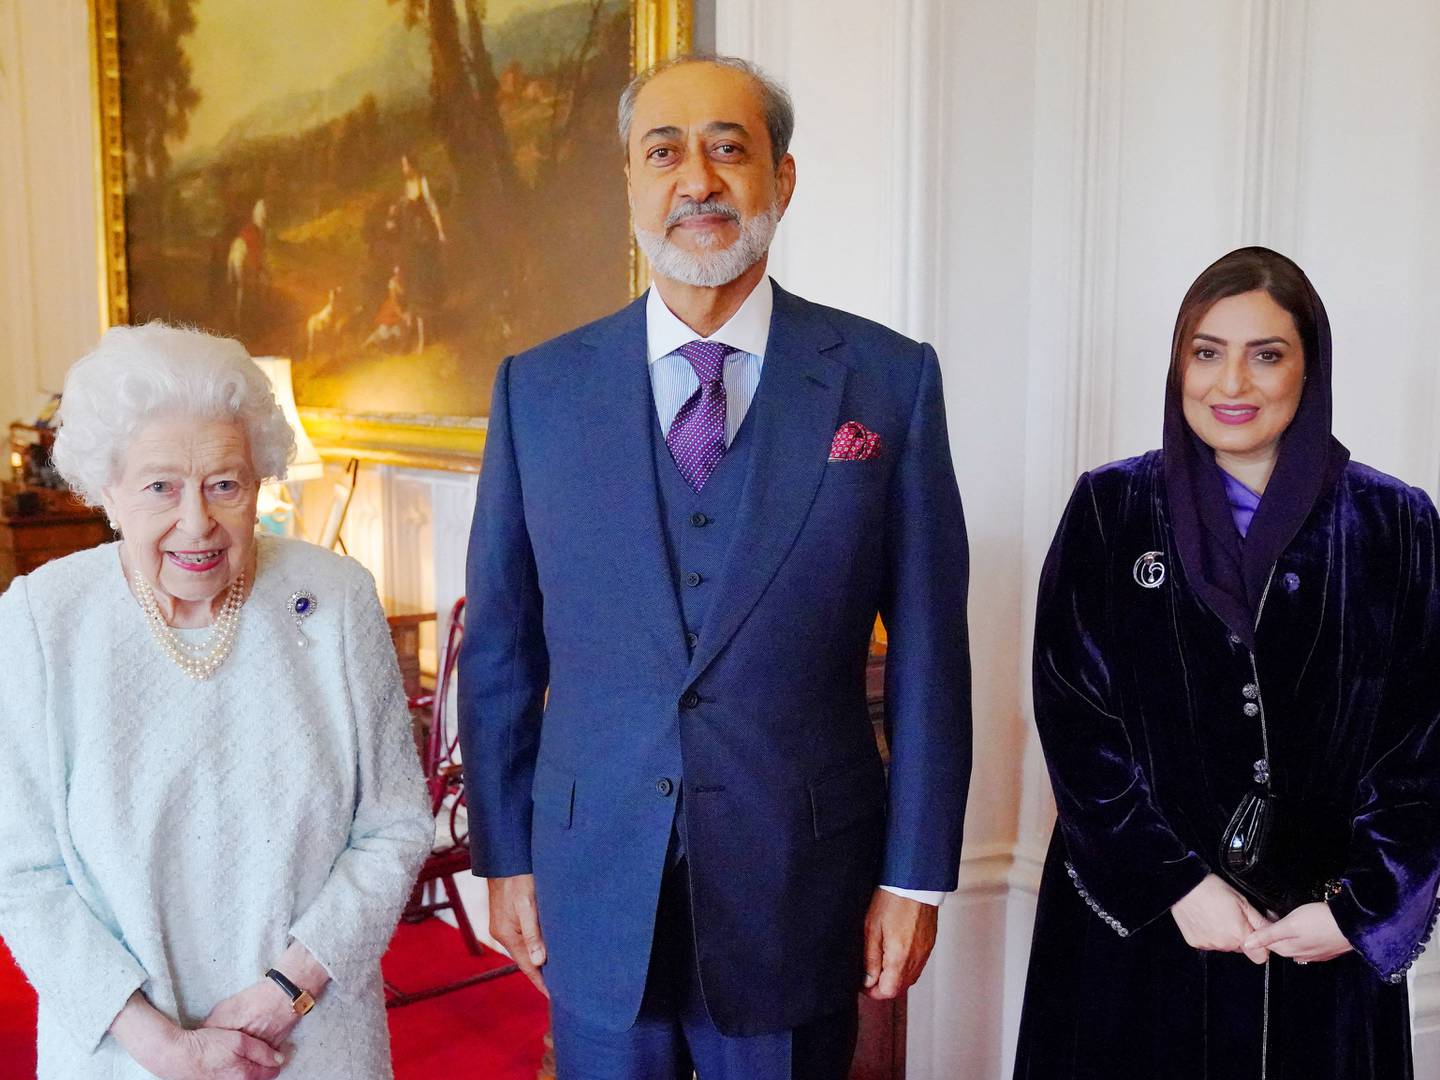 Britain's Queen Elizabeth II poses for a photograph with the Sultan of Oman. AFP